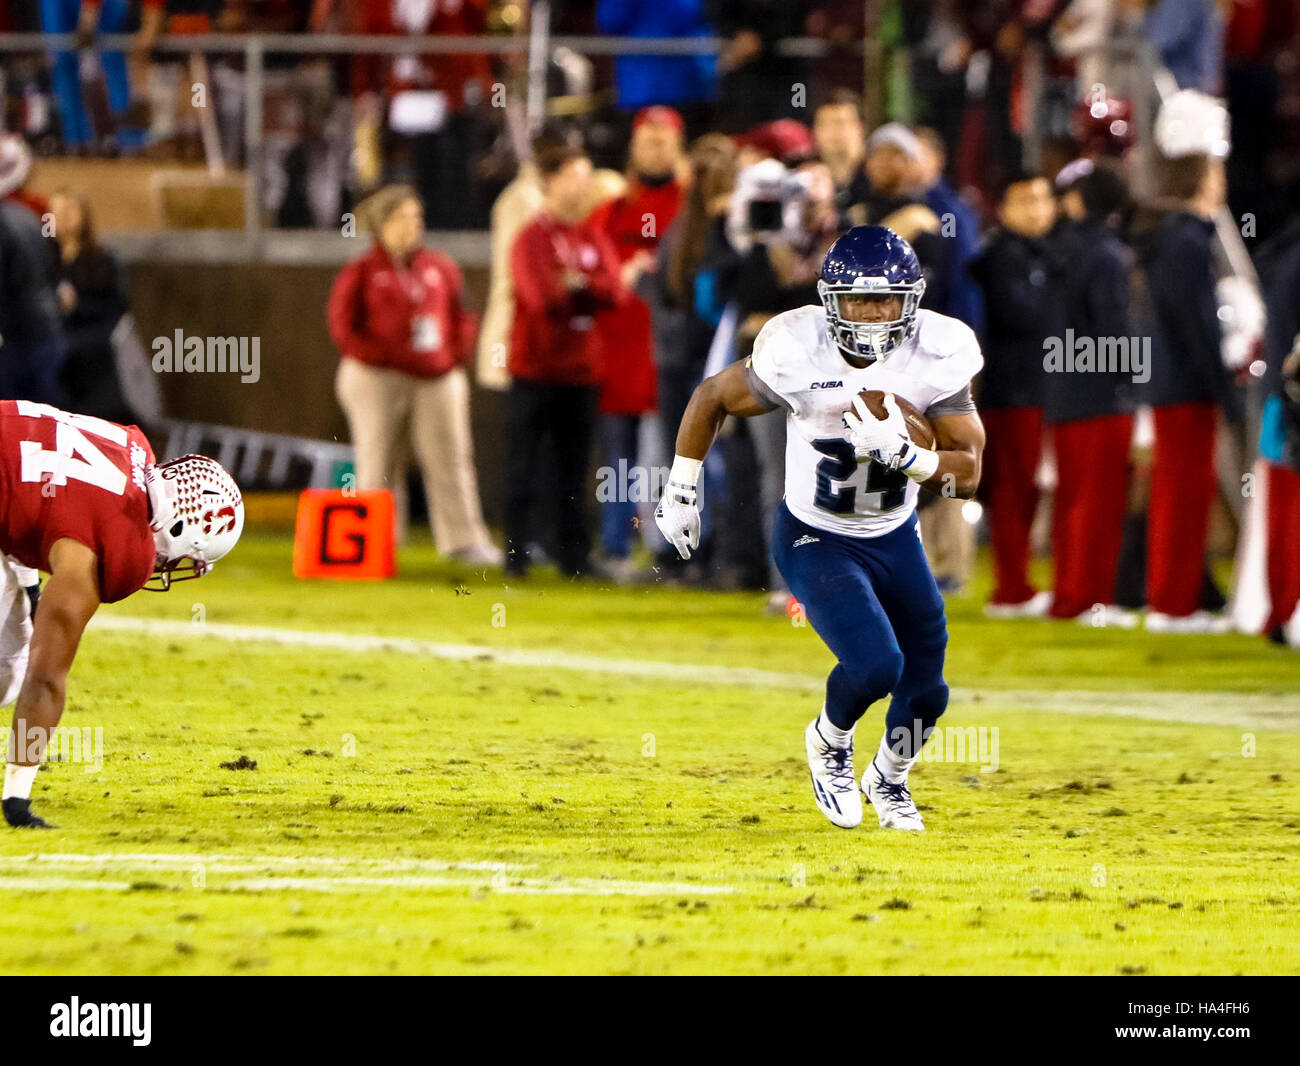 Palo Alto, California, USA. 26th Nov, 2016. Rice Running Back Sam Stewart (24) runs for a big gain in NCAA football action at Stanford University, featuring the Rice Owls visiting the Stanford Cardinal. Stanford won the game 41-17. © Seth Riskin/ZUMA Wire/Alamy Live News Stock Photo